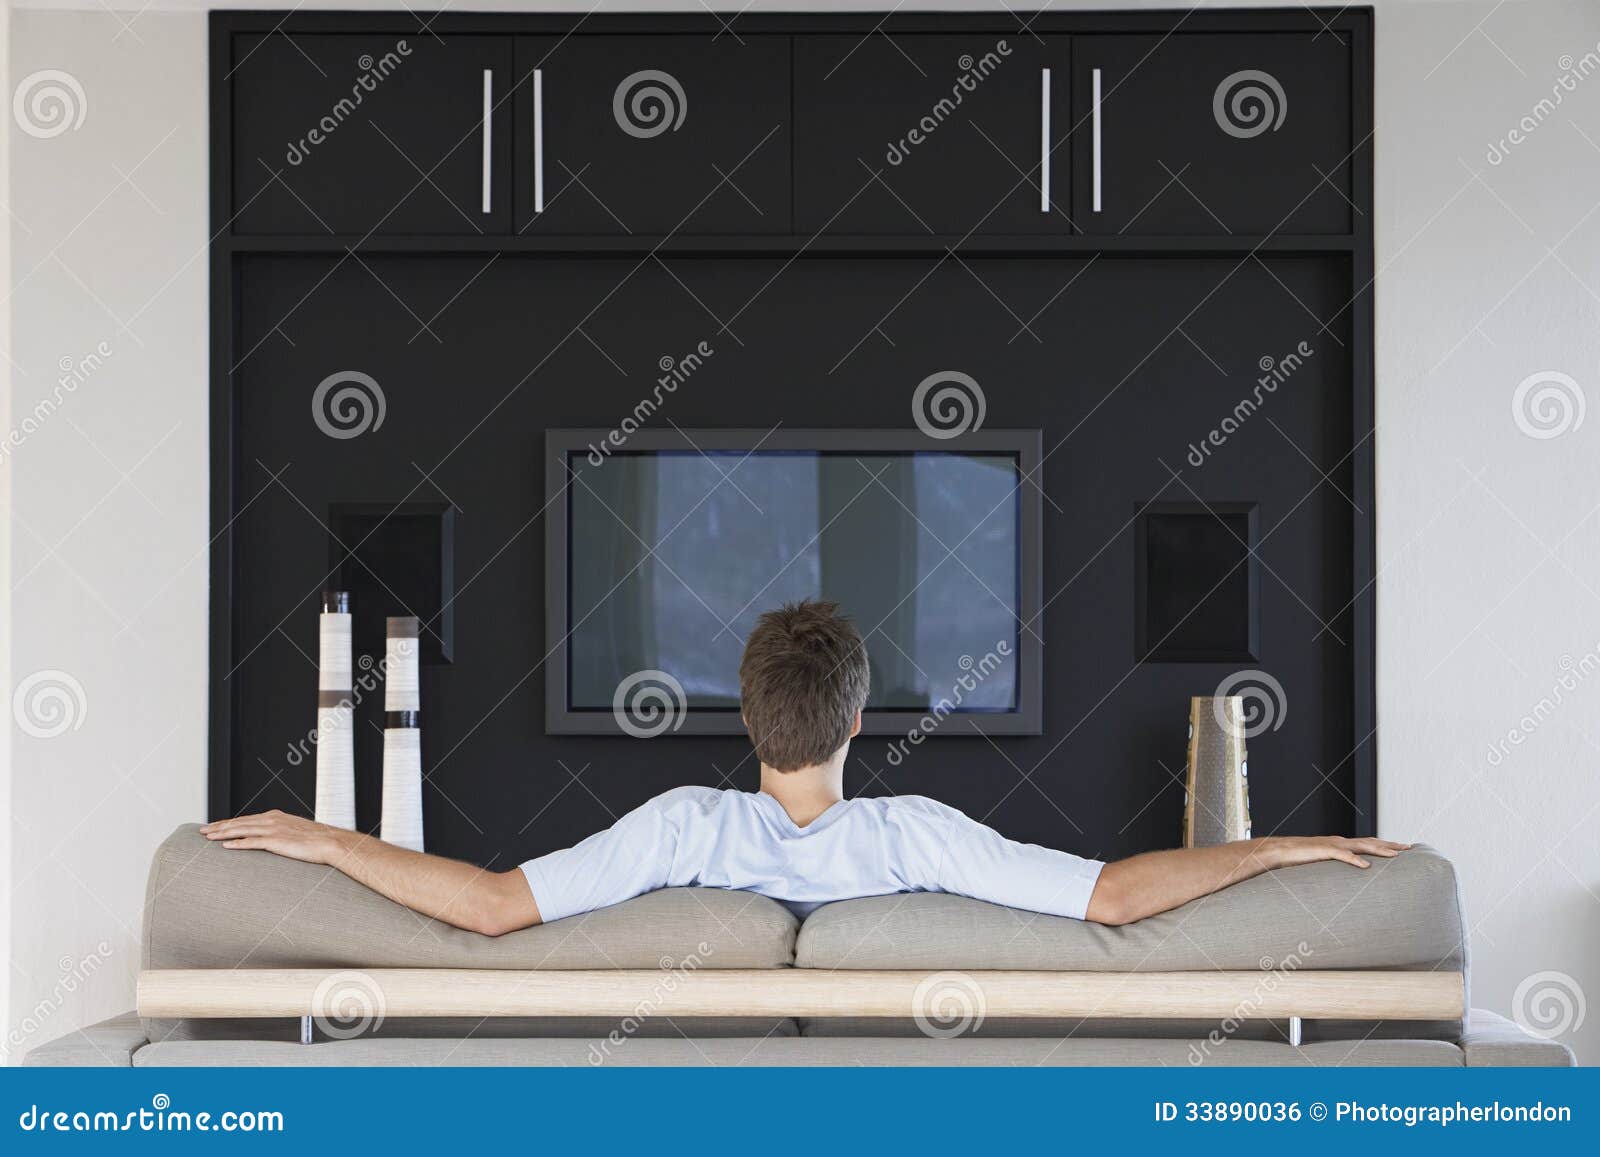 rear view of man watching television